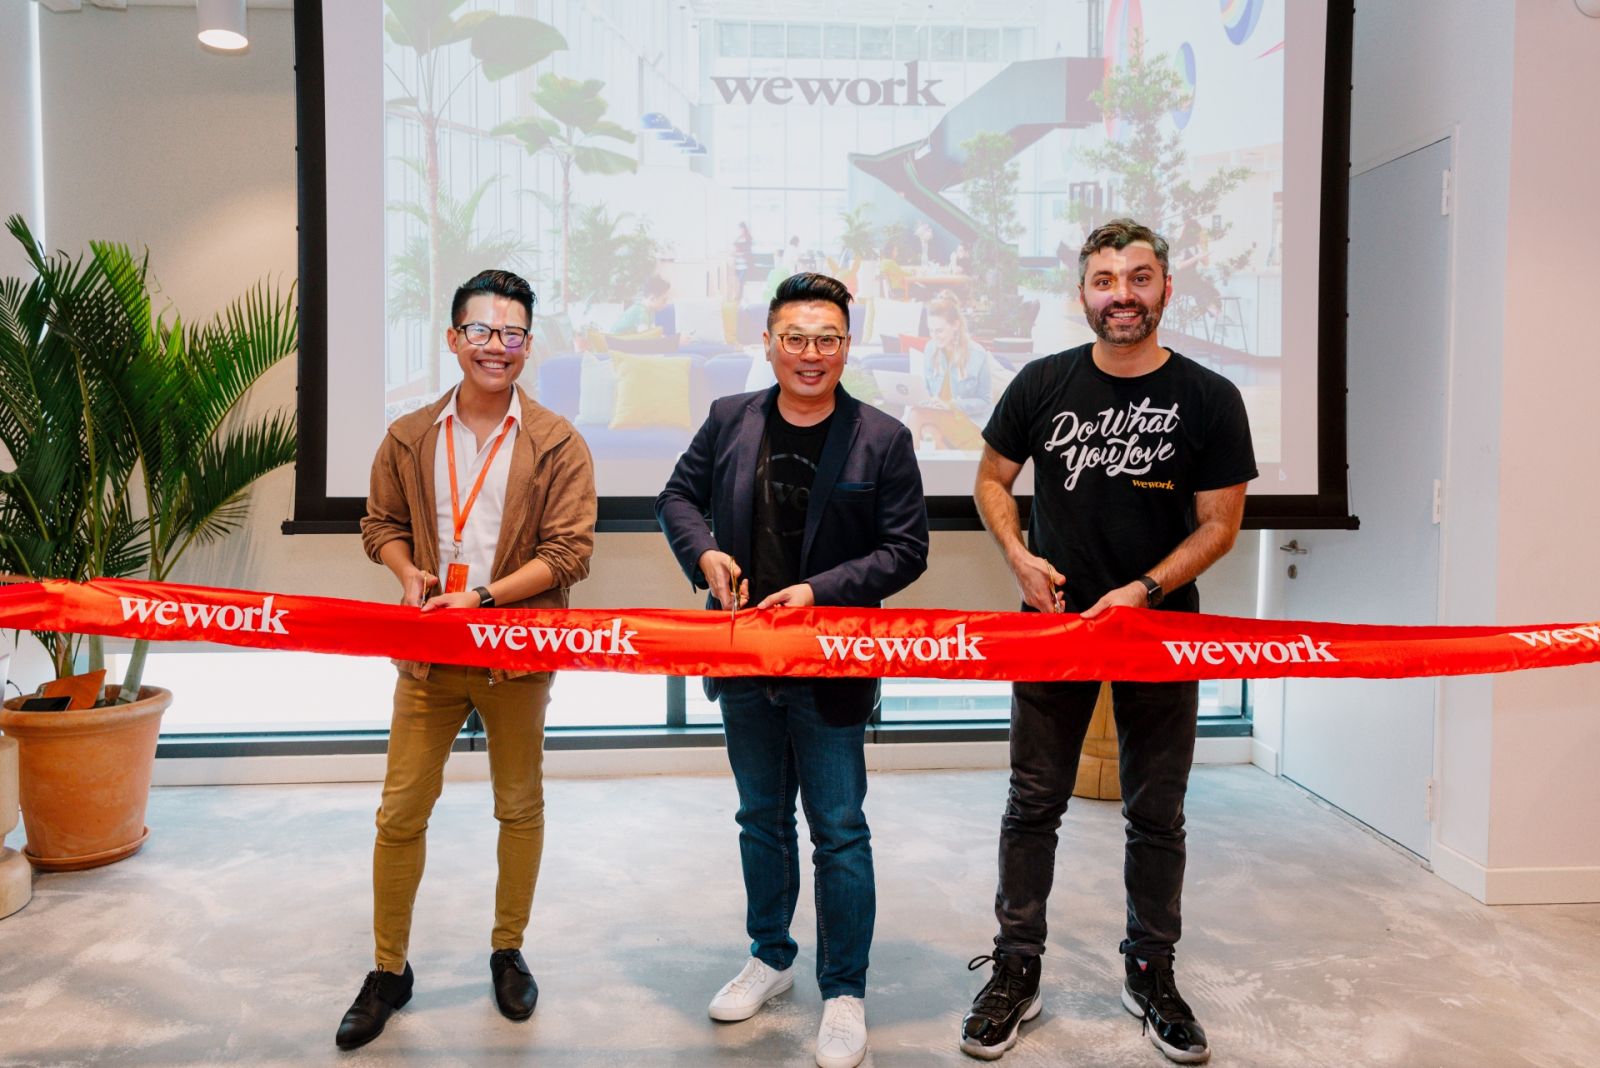 Building on the strong Southeast Asia momentum, the E. Town Central space marks WeWork's first stronghold in Ho Chi Minh City.